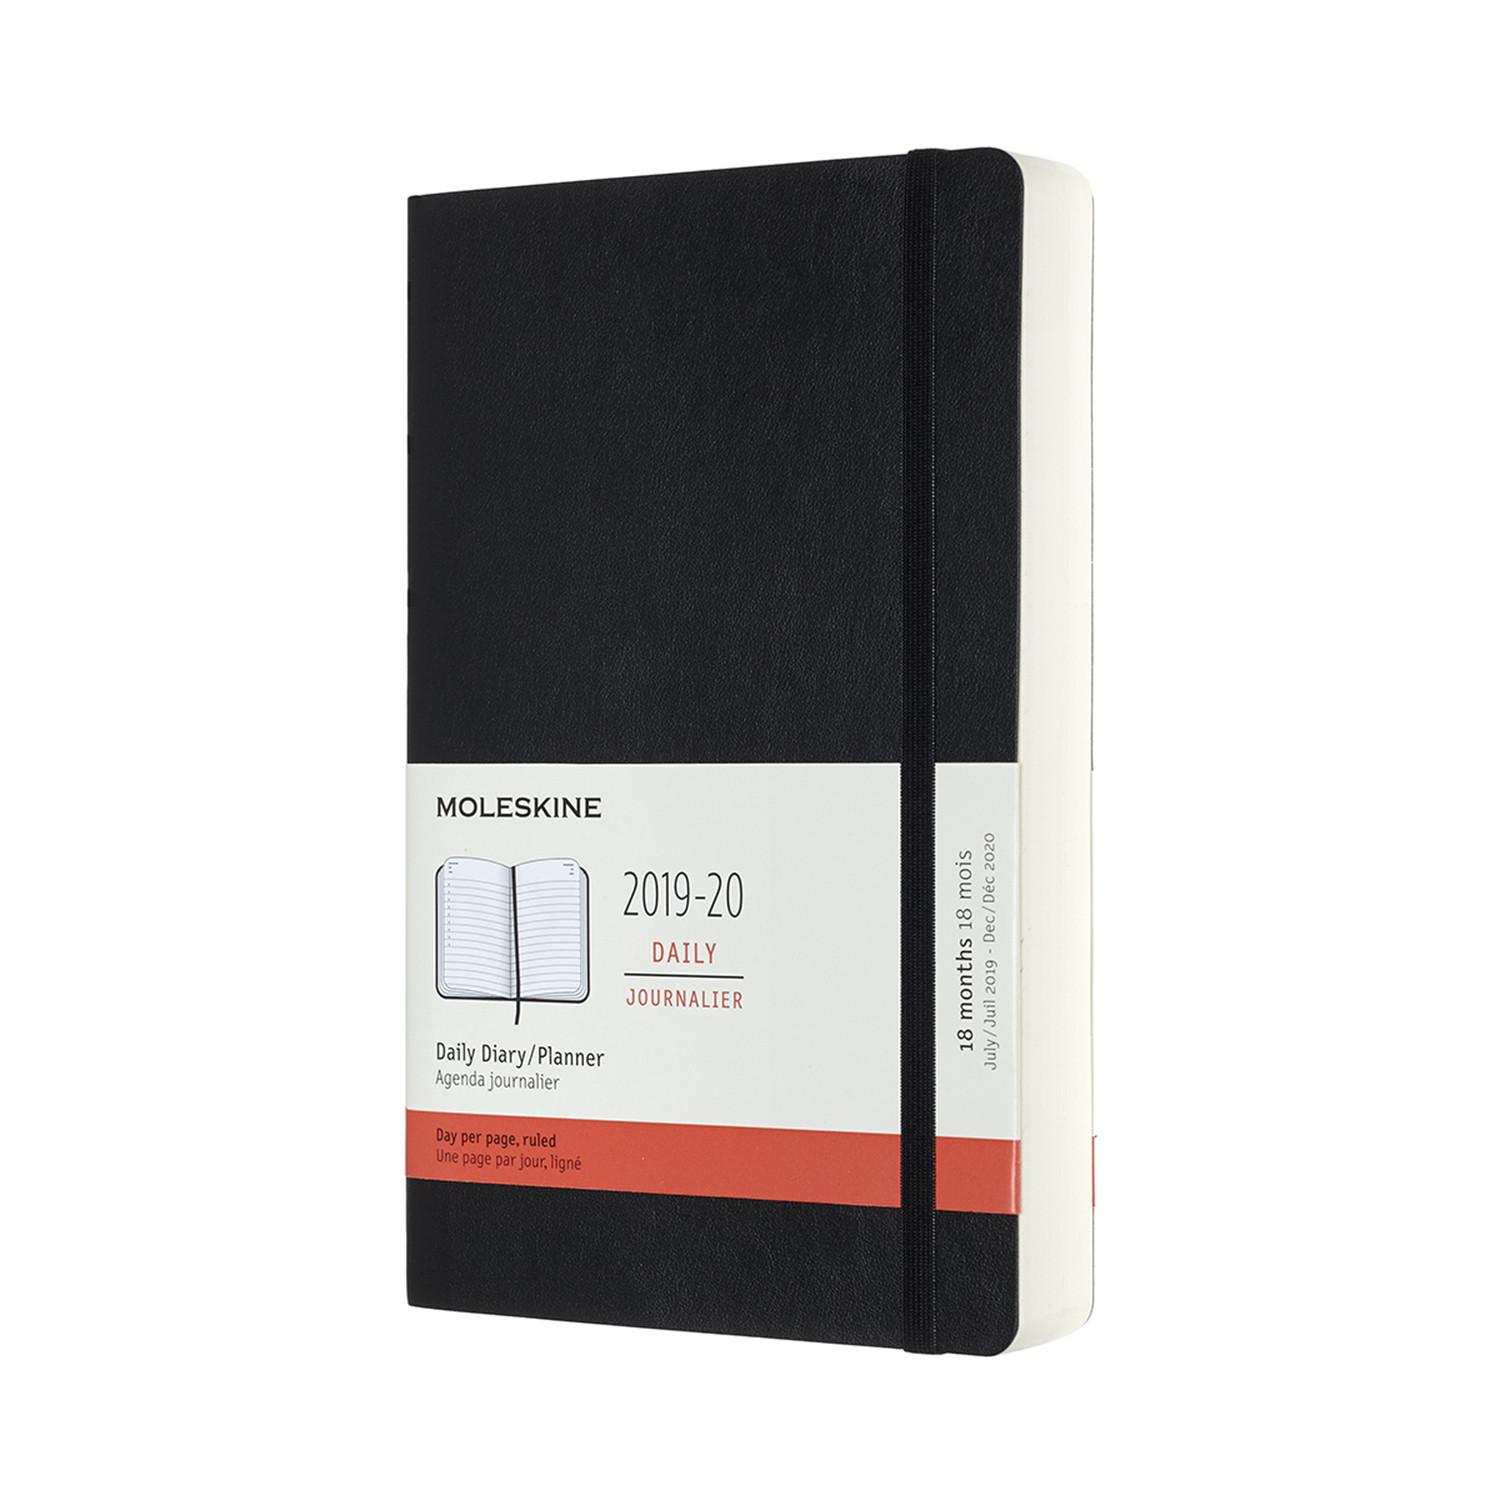 Moleskine 2019-20 18M Daily Diary Large Black Softcover